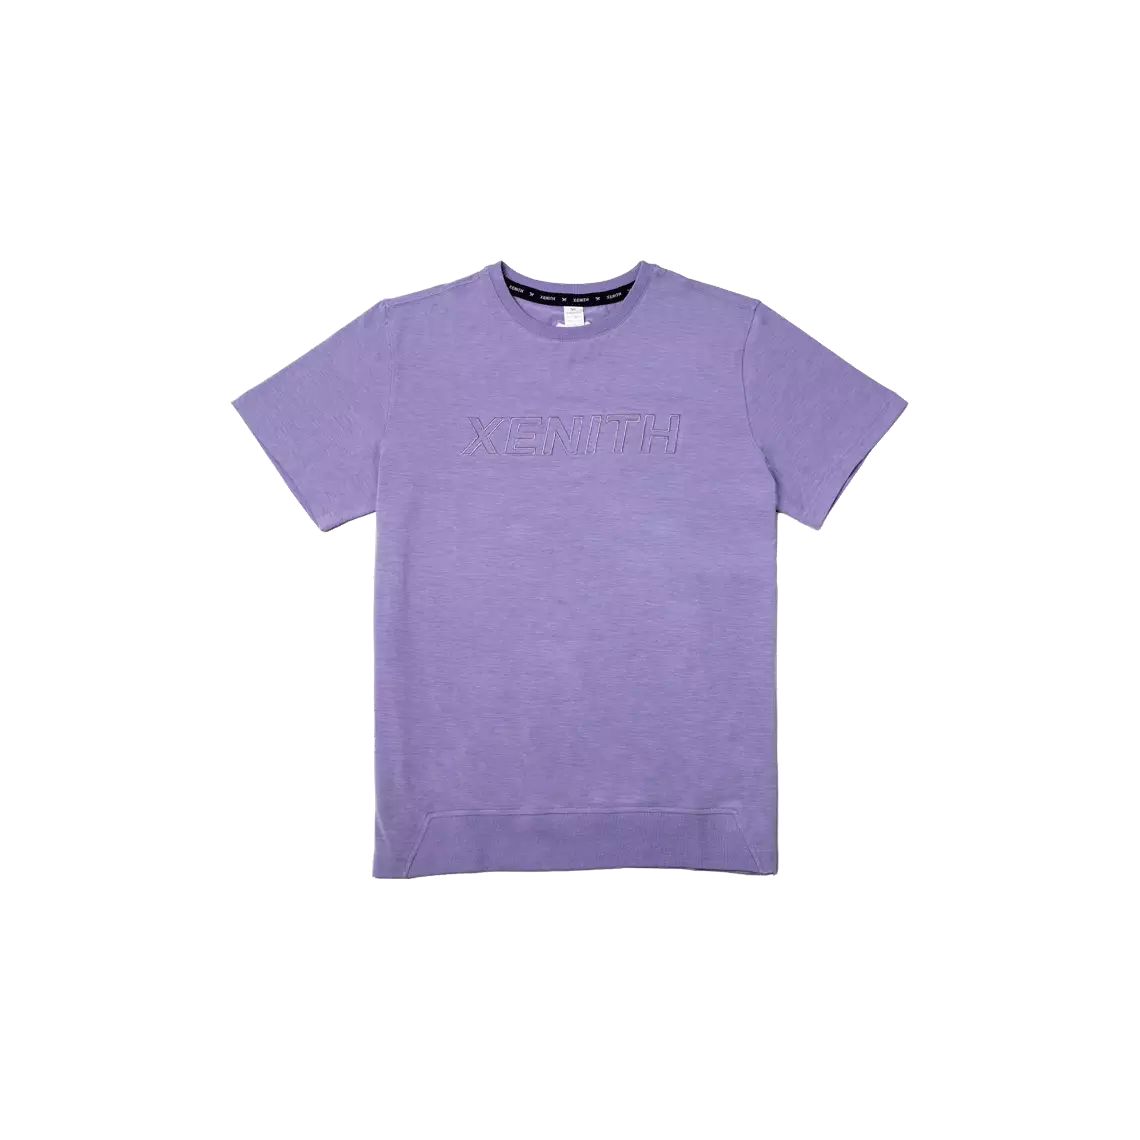 Dusk Xenith Short Sleeve Shirt from front.